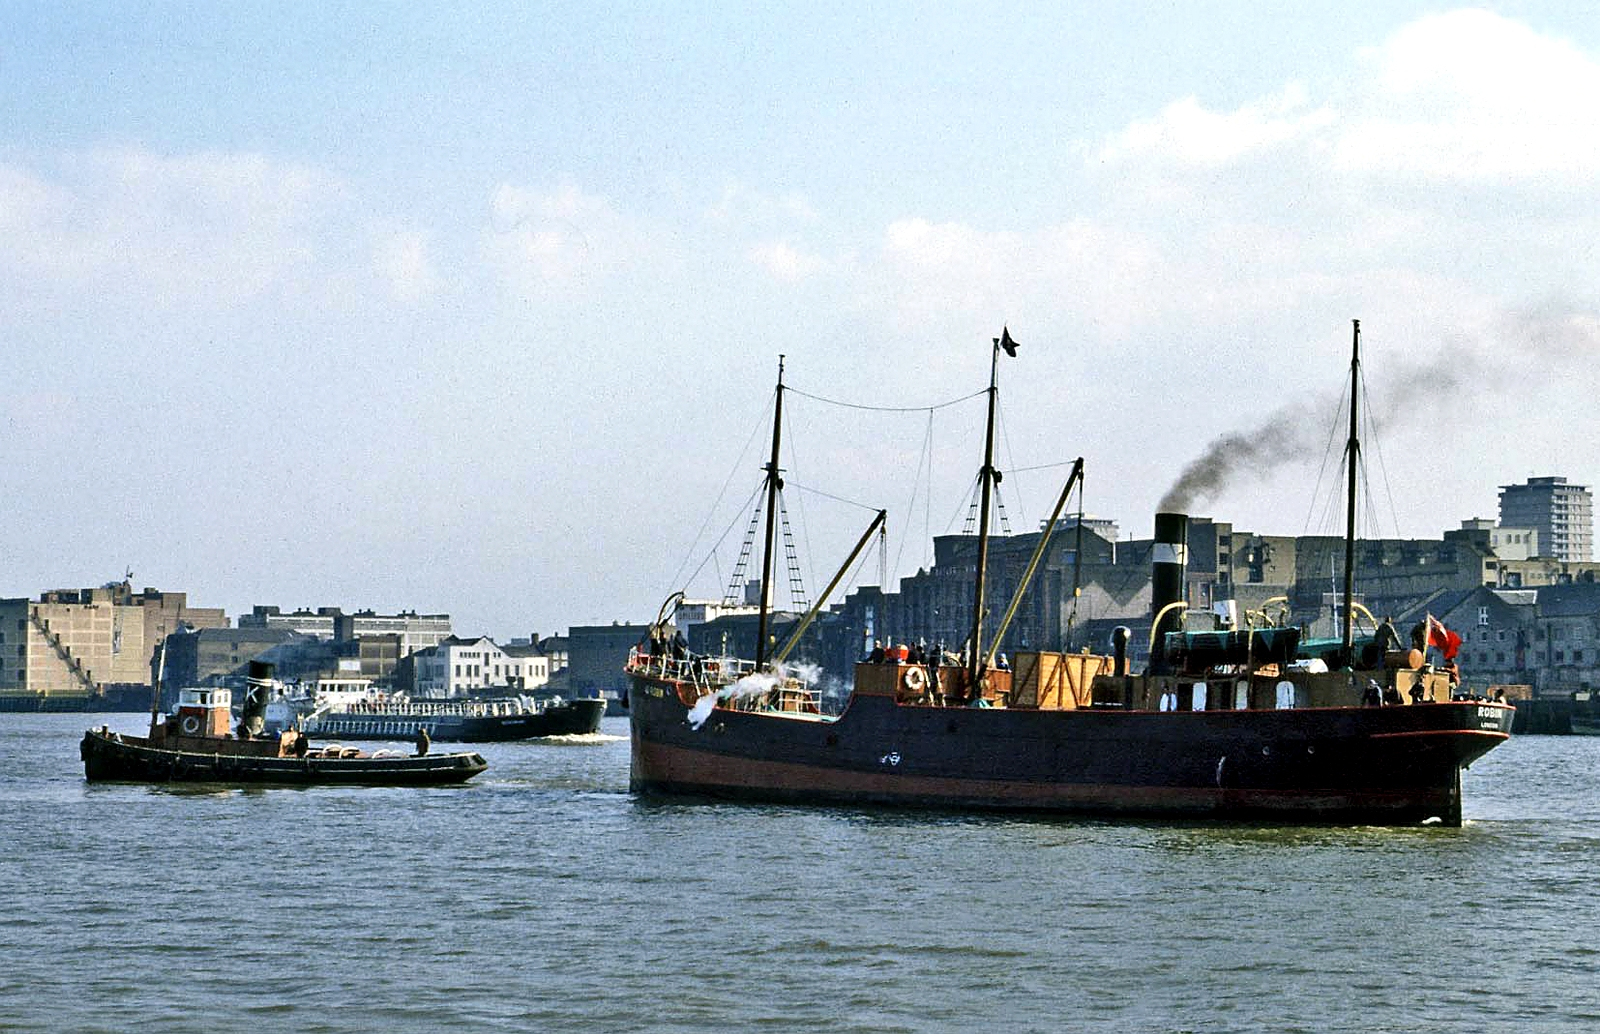 A tugboat in the Royal Docks